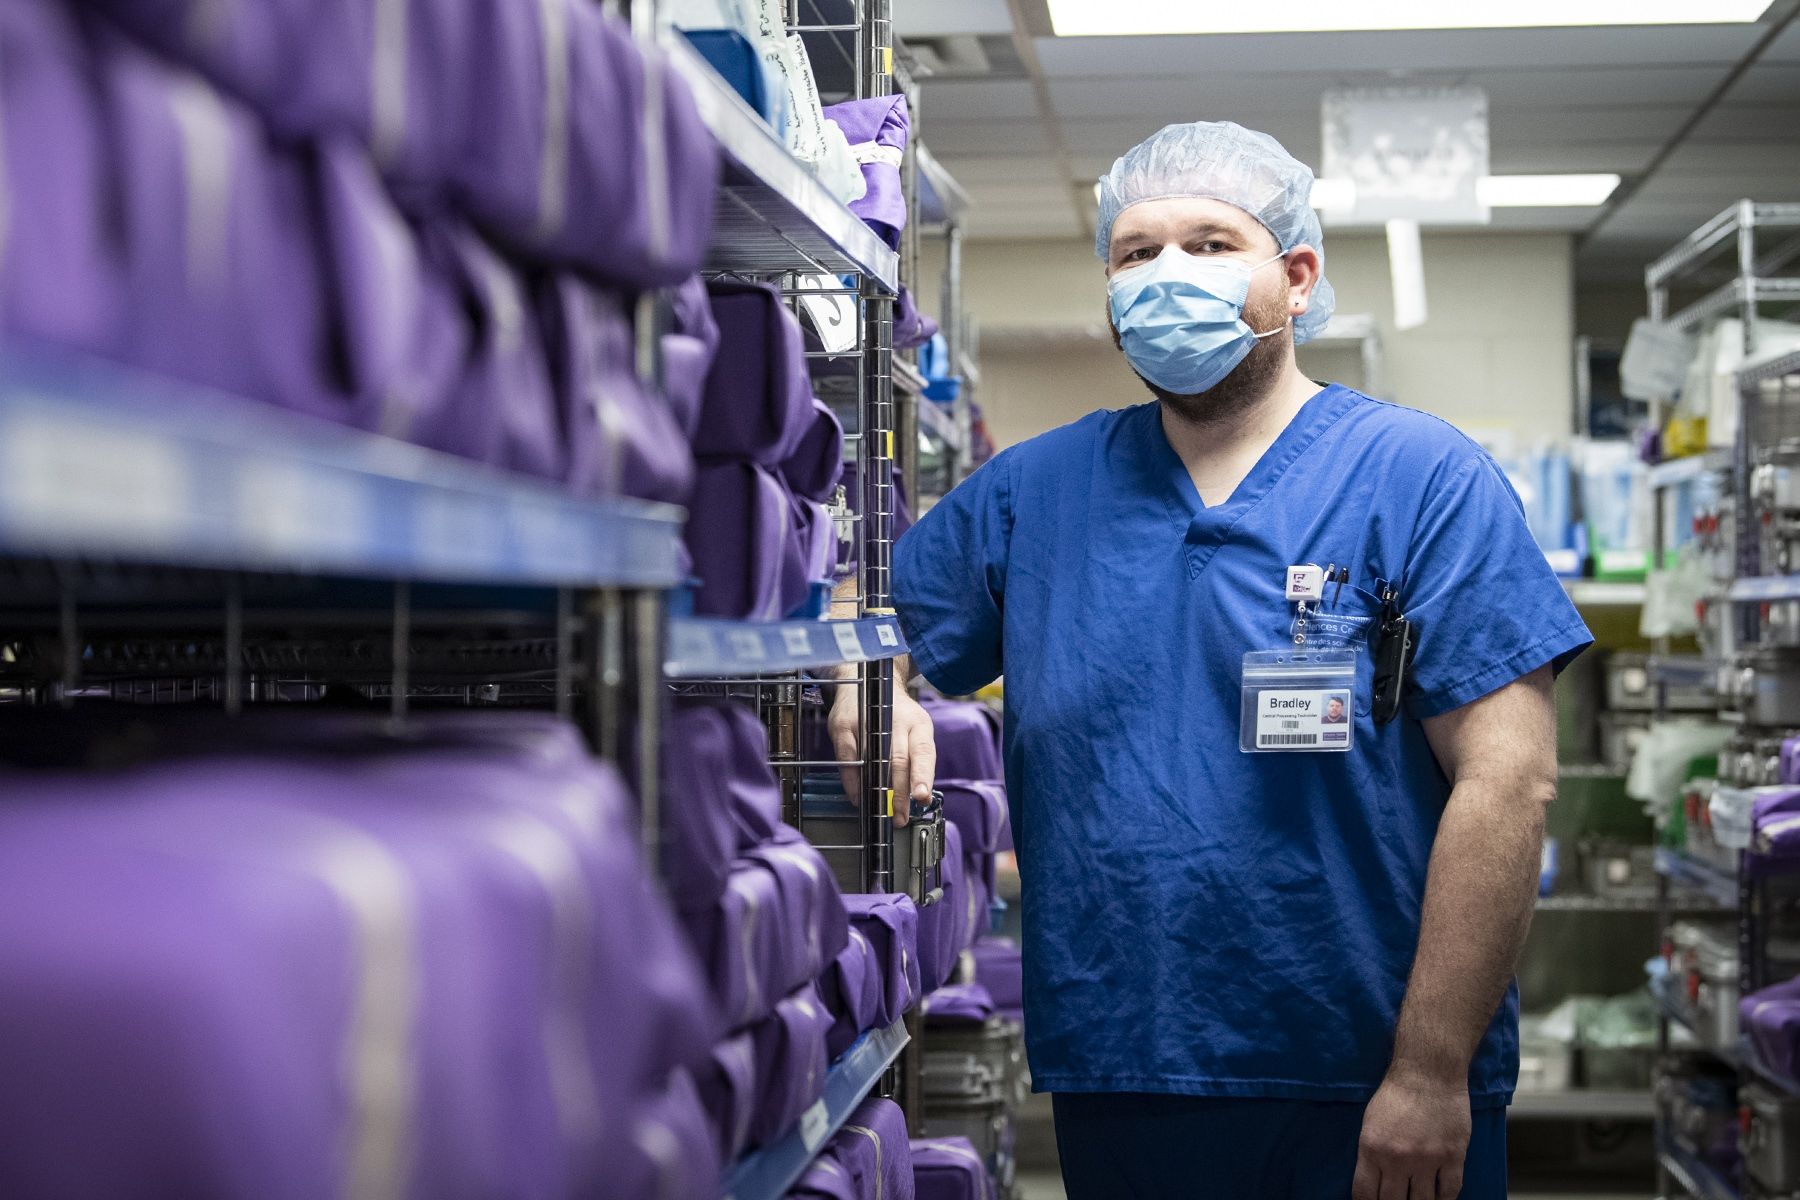 Bradley Leaver is wearing blue scrubs and photographed inside the Medical Device Reprocessing department at KHSC.